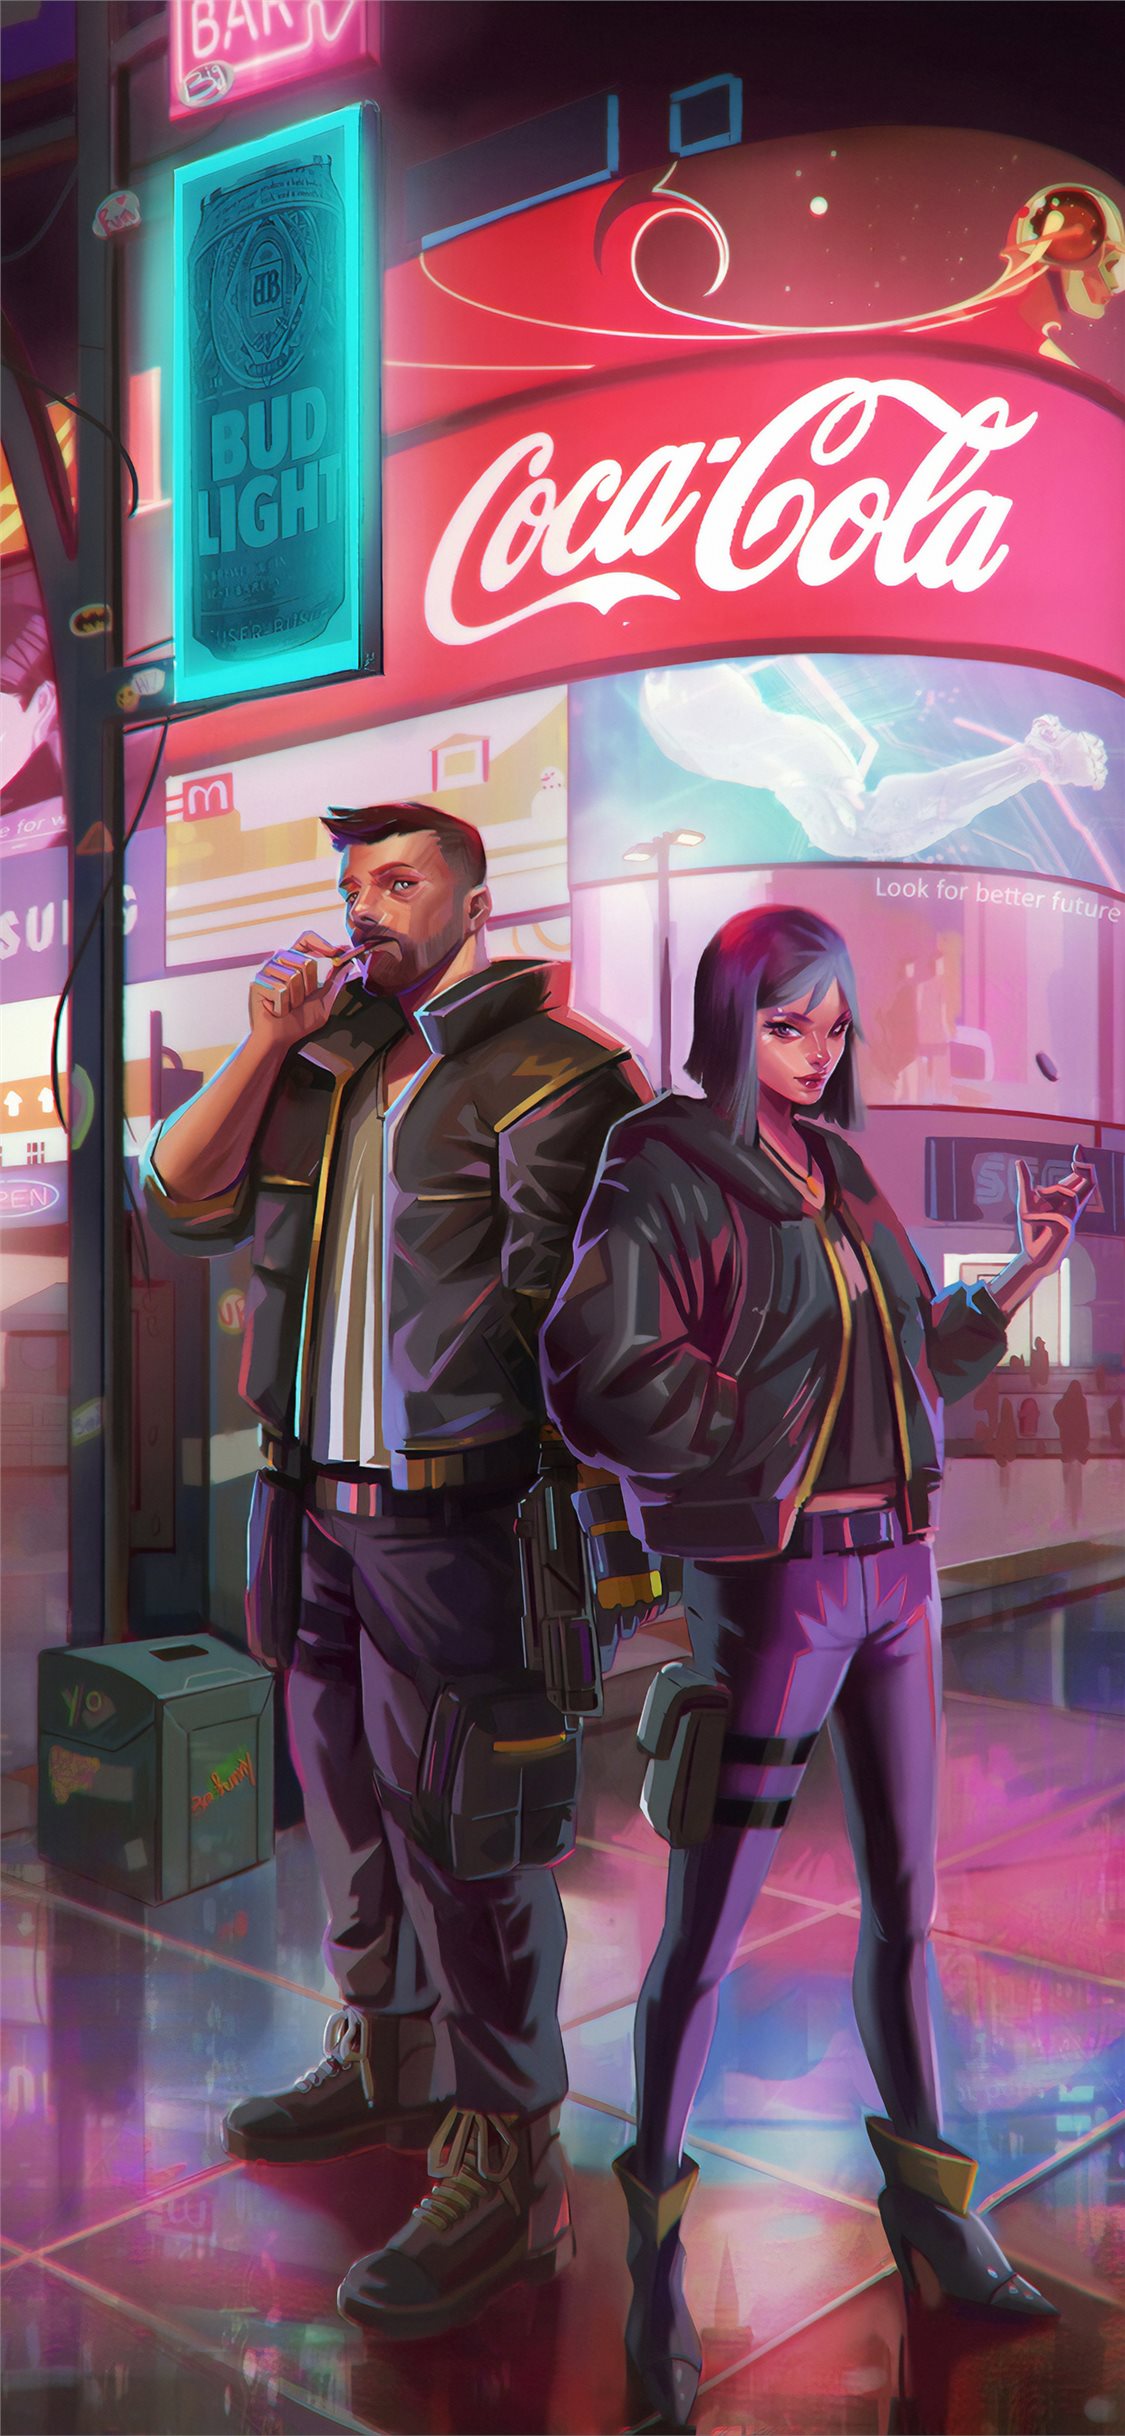 Featured image of post Cyberpunk 2077 Iphone Xs Max Images - Image macros and generic reaction media are not allowed, this includes &#039;inserting&#039; cyberpunk content into meme templates.